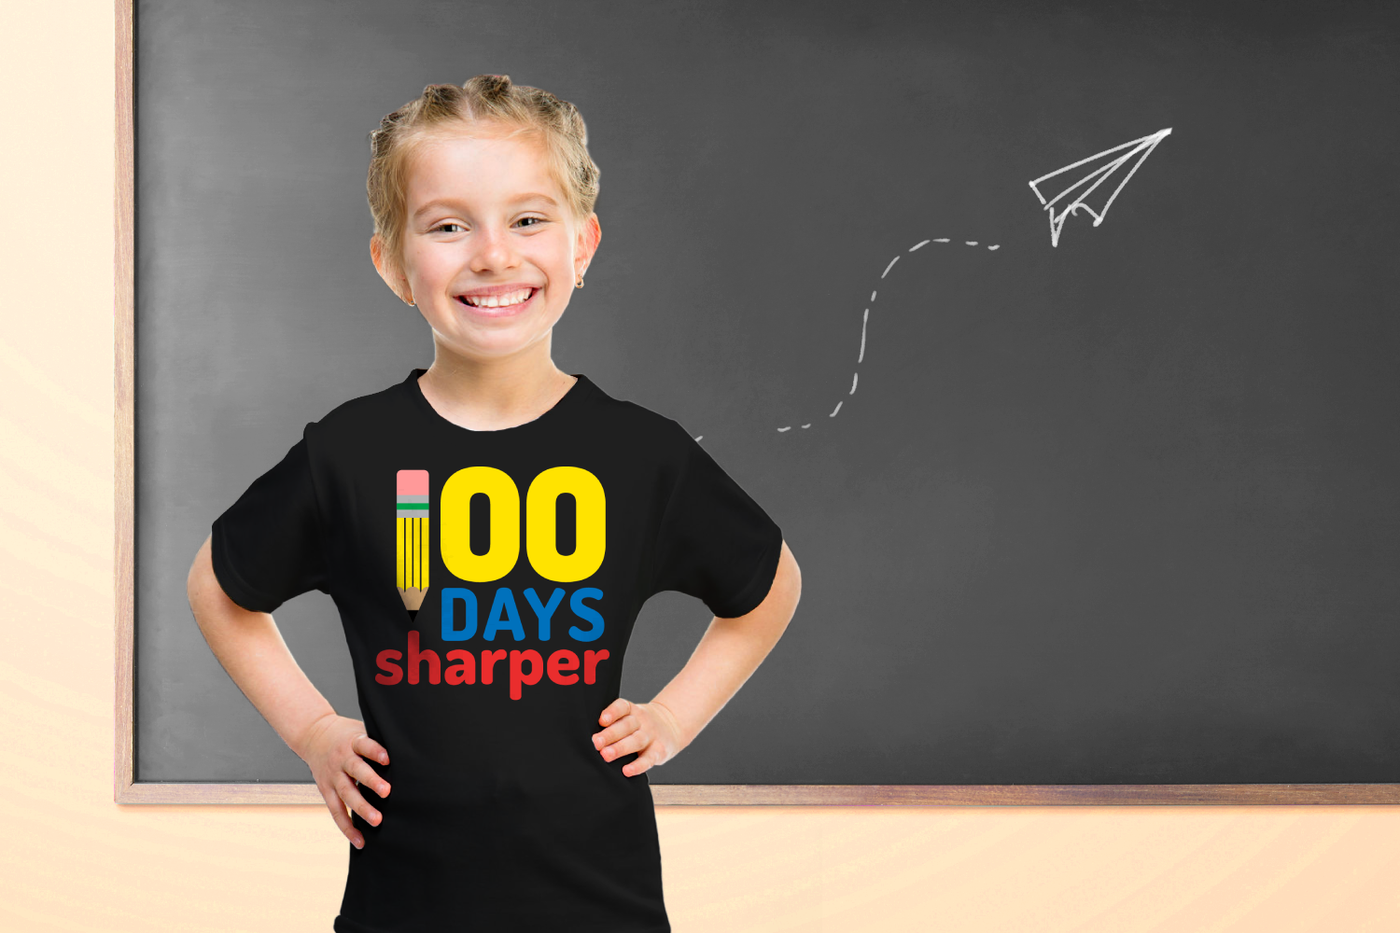 A white little girl wearing a black tee stands in front of a chalkboard with a paper airplane drawn on it. Her shirt says "100 days sharper" in yellow, blue, and red with a pencil in place of the 1.